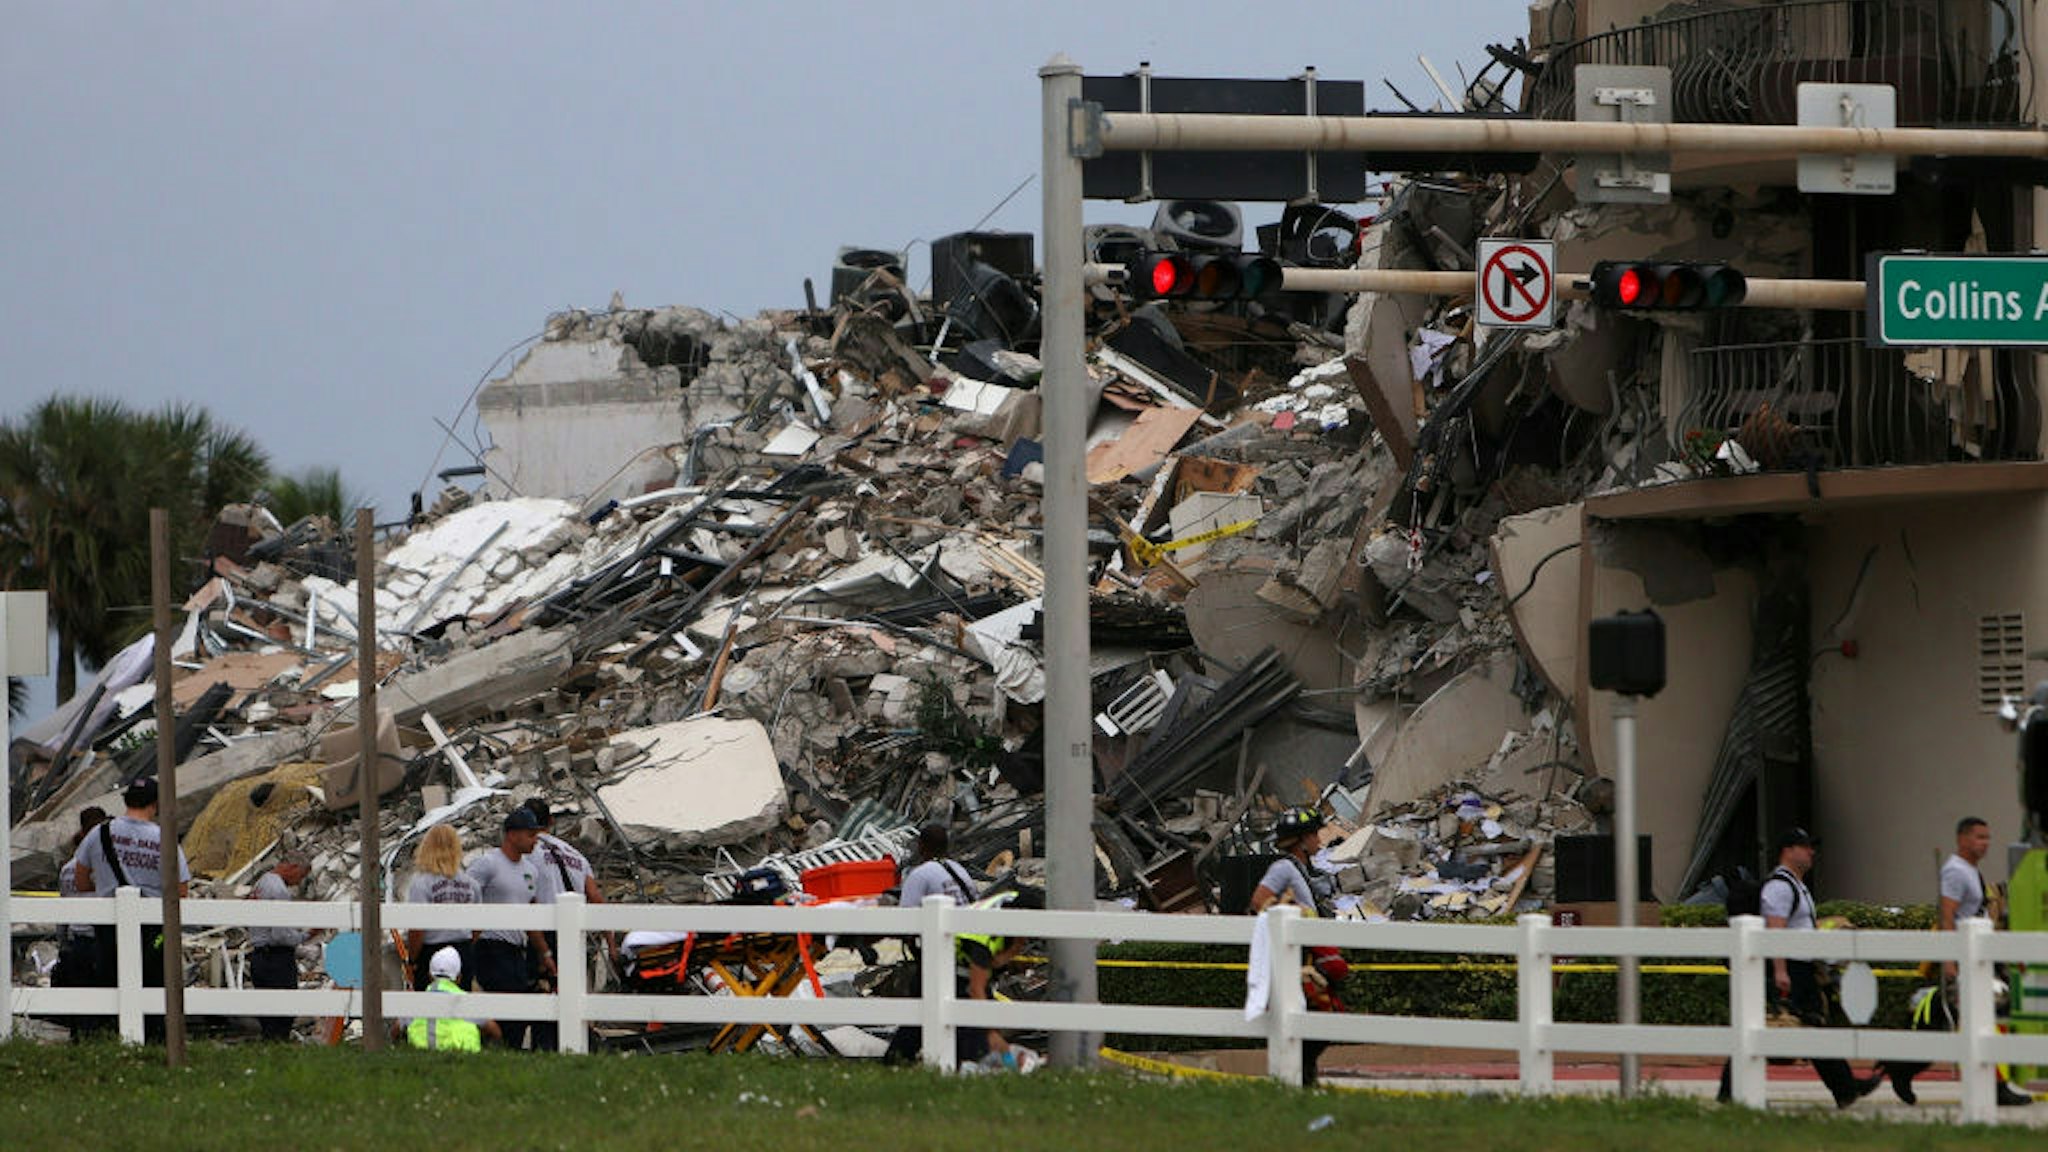 SURFSIDE, FLORIDA - JUNE 24: Rubble is piled high after the partial collapse of the 12-story Champlain Towers South condo building on June 24, 2021 in Surfside, Florida. It is unknown at this time how many people were injured as search-and-rescue effort continues with rescue crews from across Miami-Dade and Broward counties.